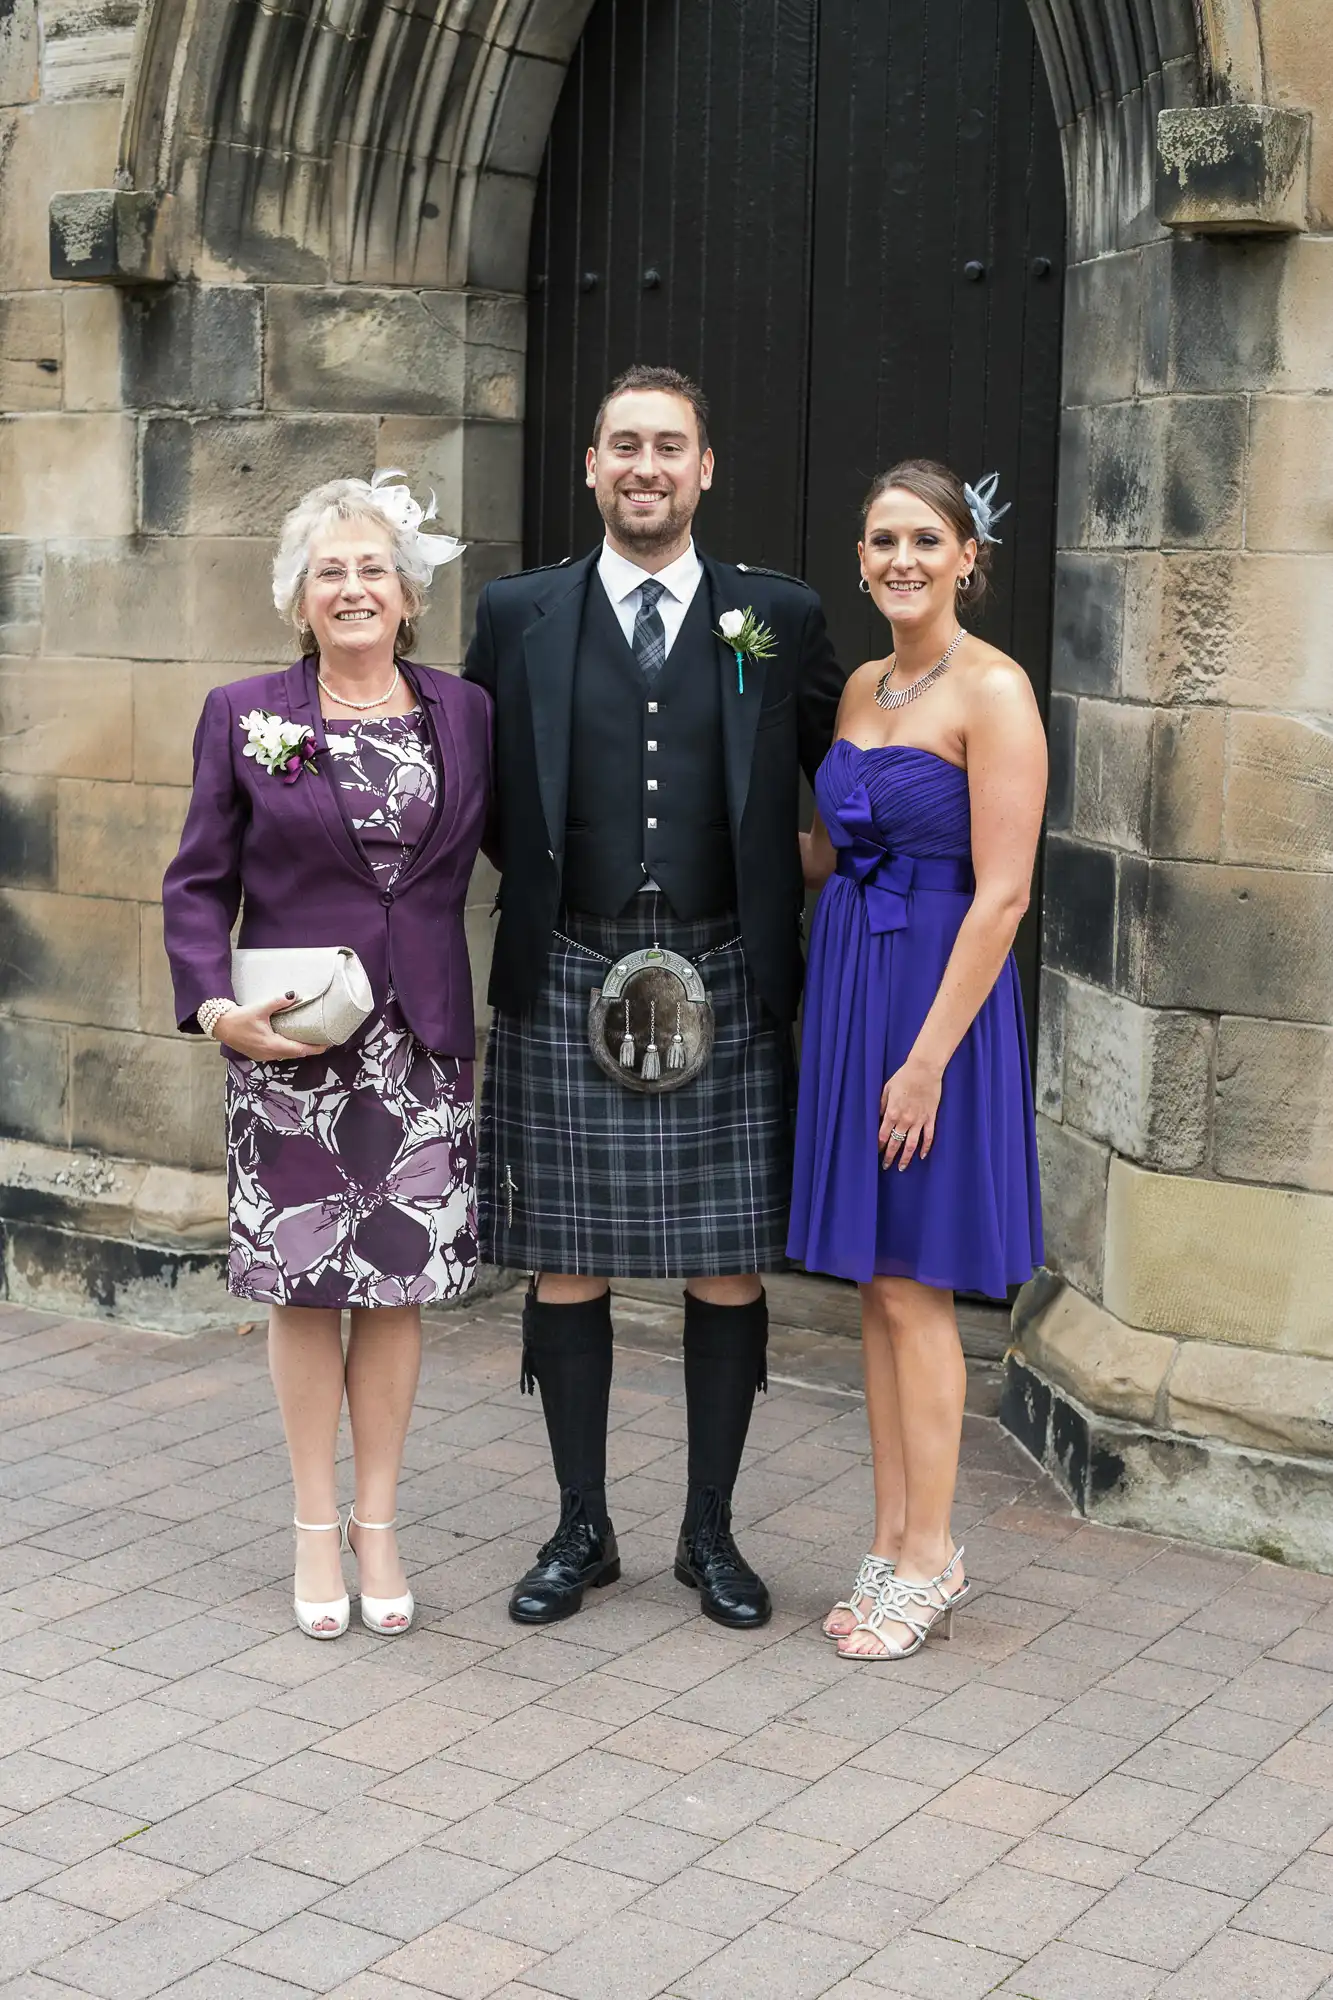 Three people posing for a photo at a wedding, featuring a man in a kilt flanked by two women in elegant dresses, standing in front of an arched stone doorway.